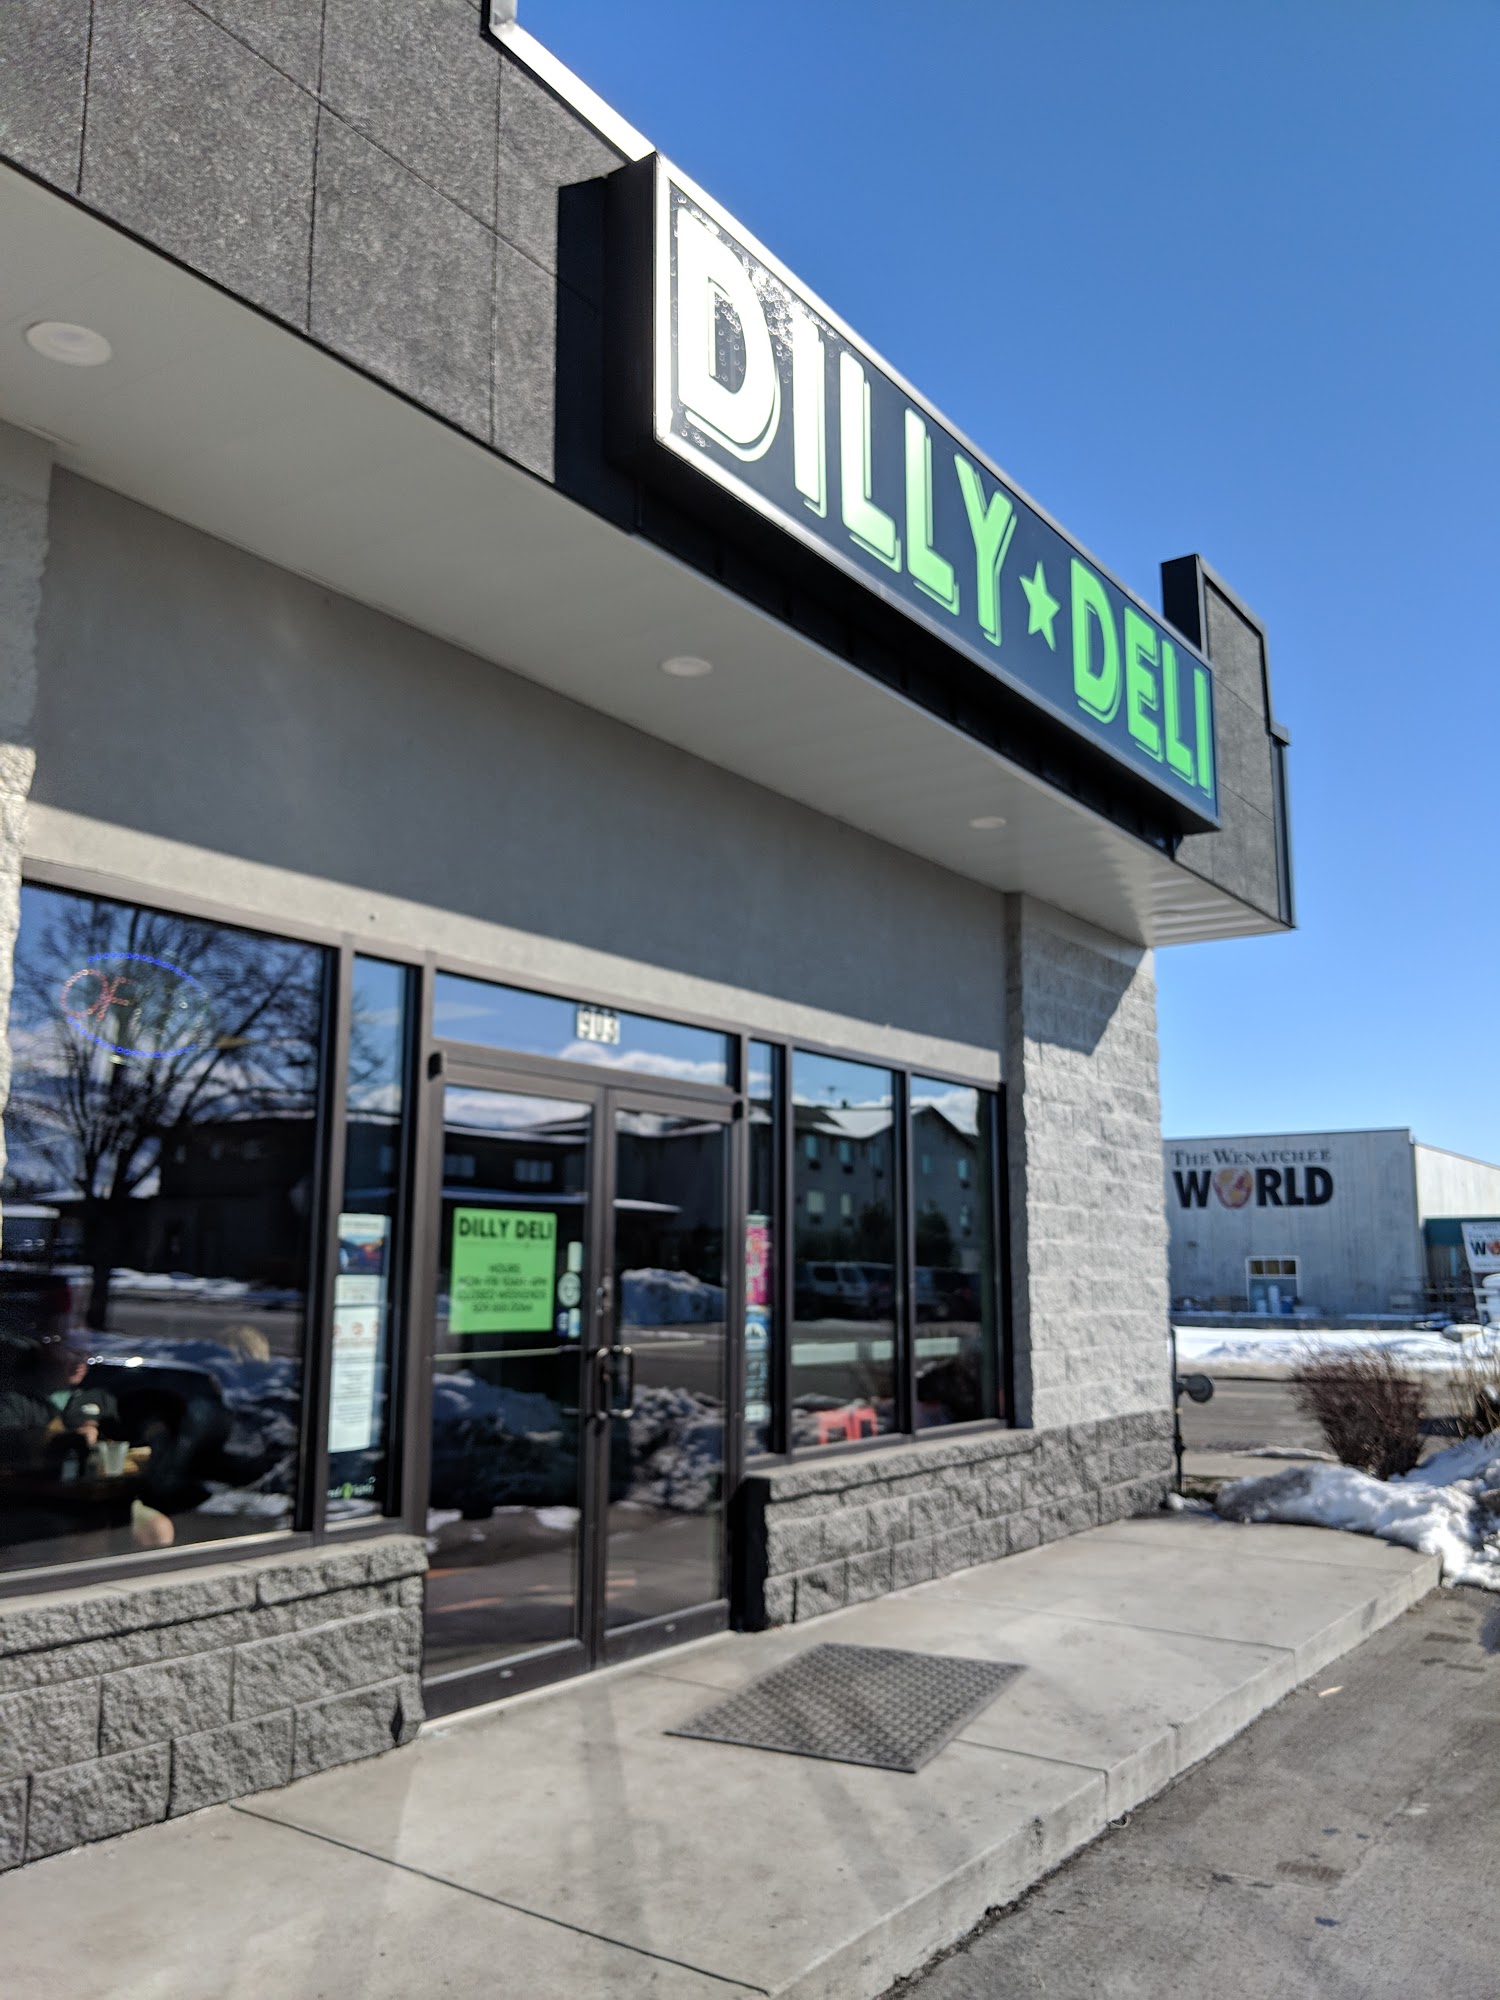 The Dilly Deli